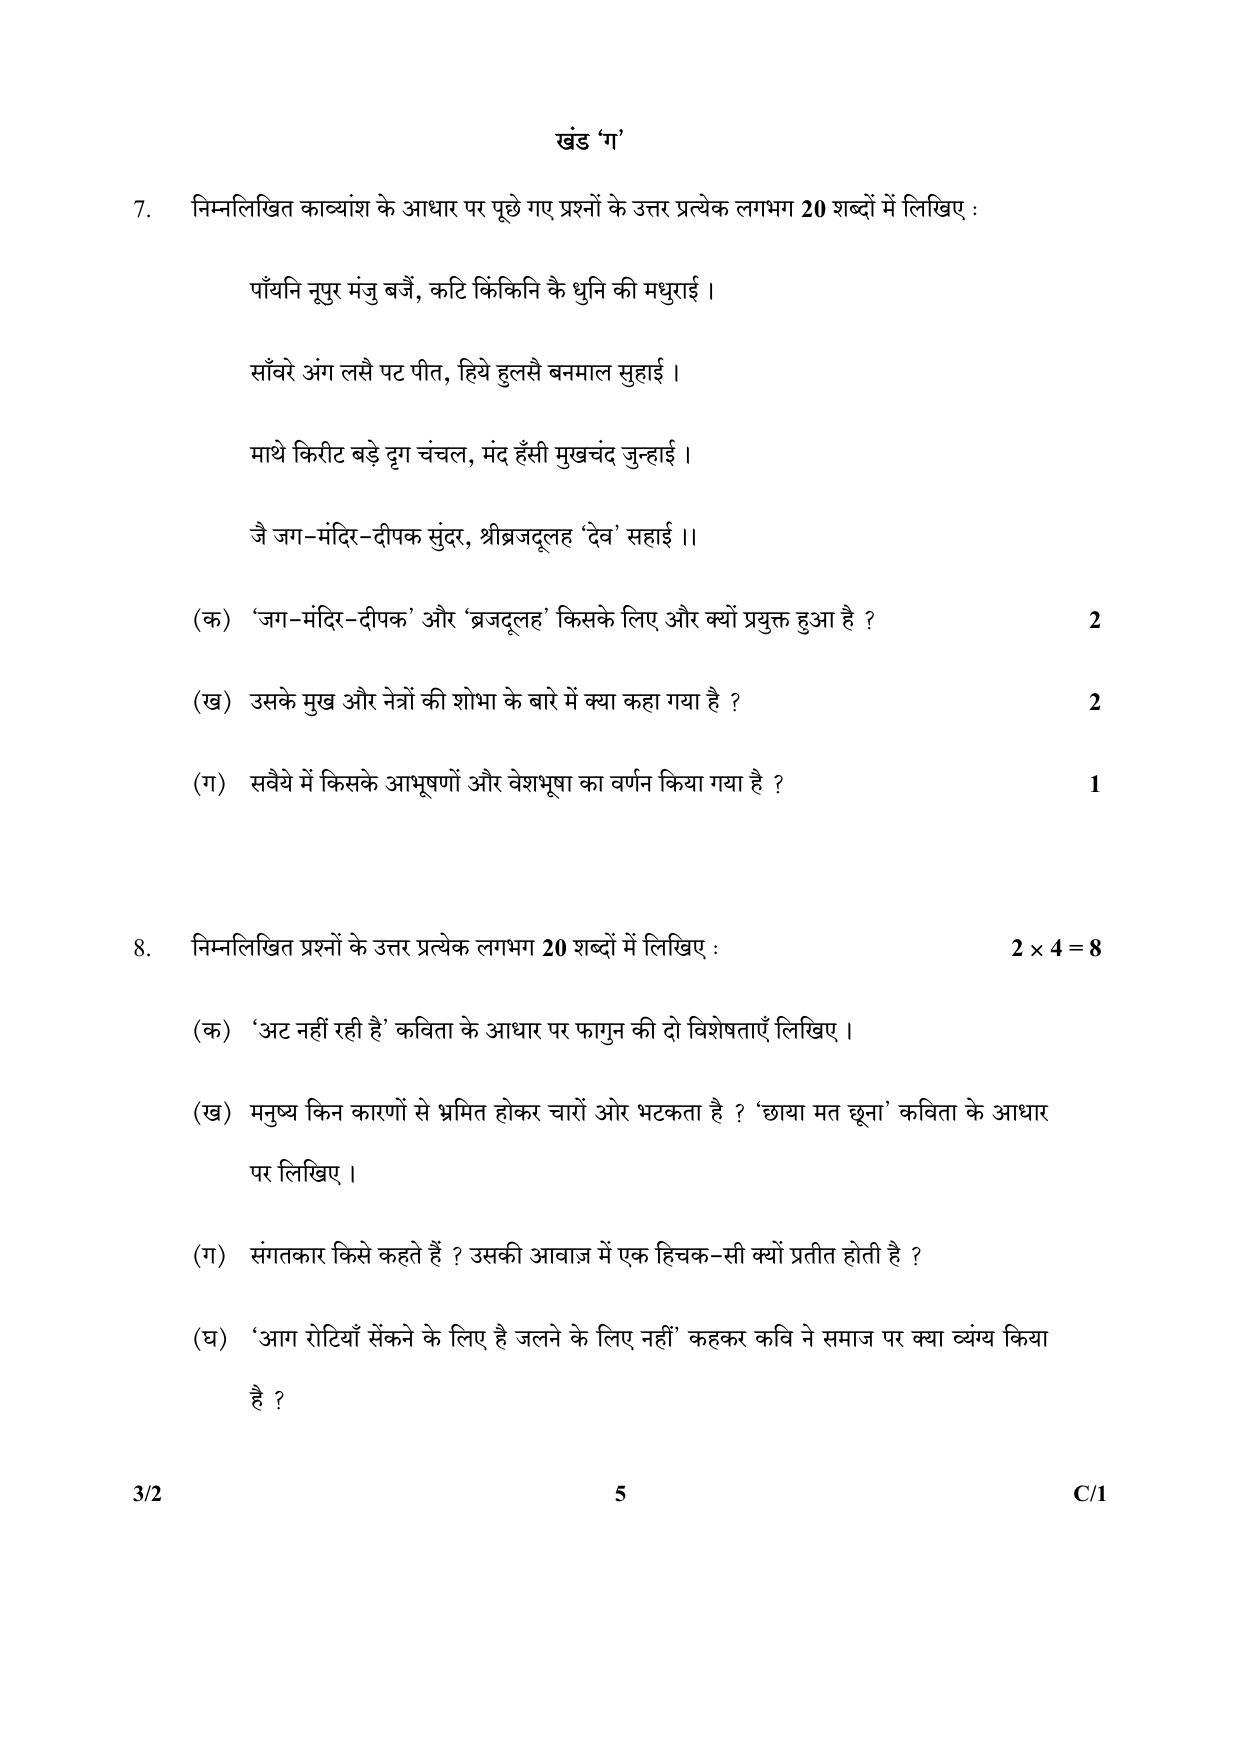 CBSE Class 10 3-2_Hindi 2018 Compartment Question Paper - Page 5